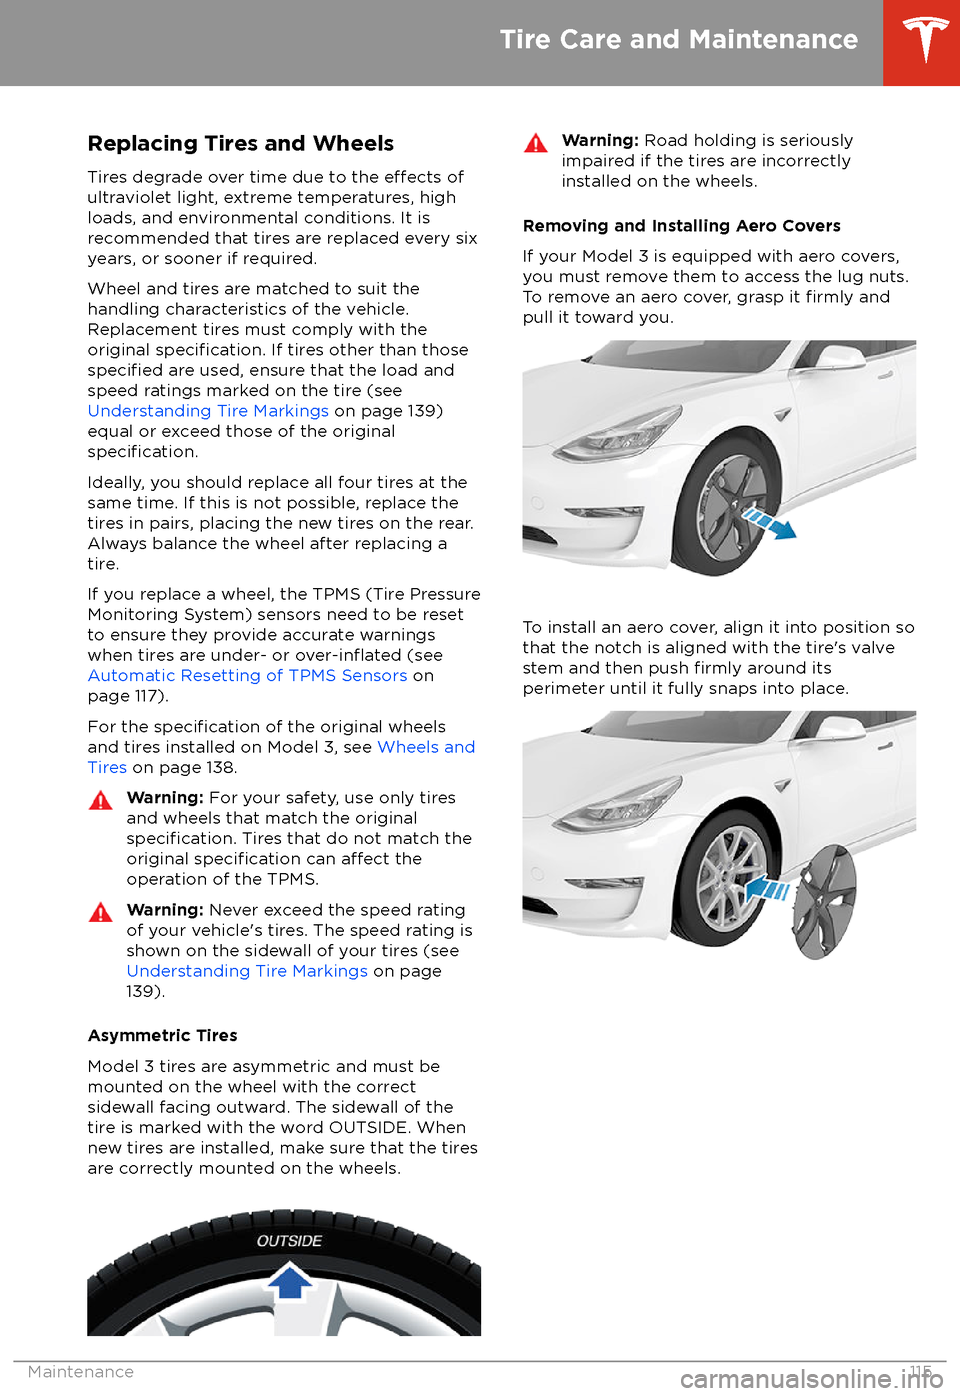 TESLA MODEL 3 2018 Owners Guide Replacing Tires and Wheels
Tires degrade over time due to the 
effects of
ultraviolet light, extreme temperatures, high
loads, and environmental conditions. It is
recommended that tires are replaced e